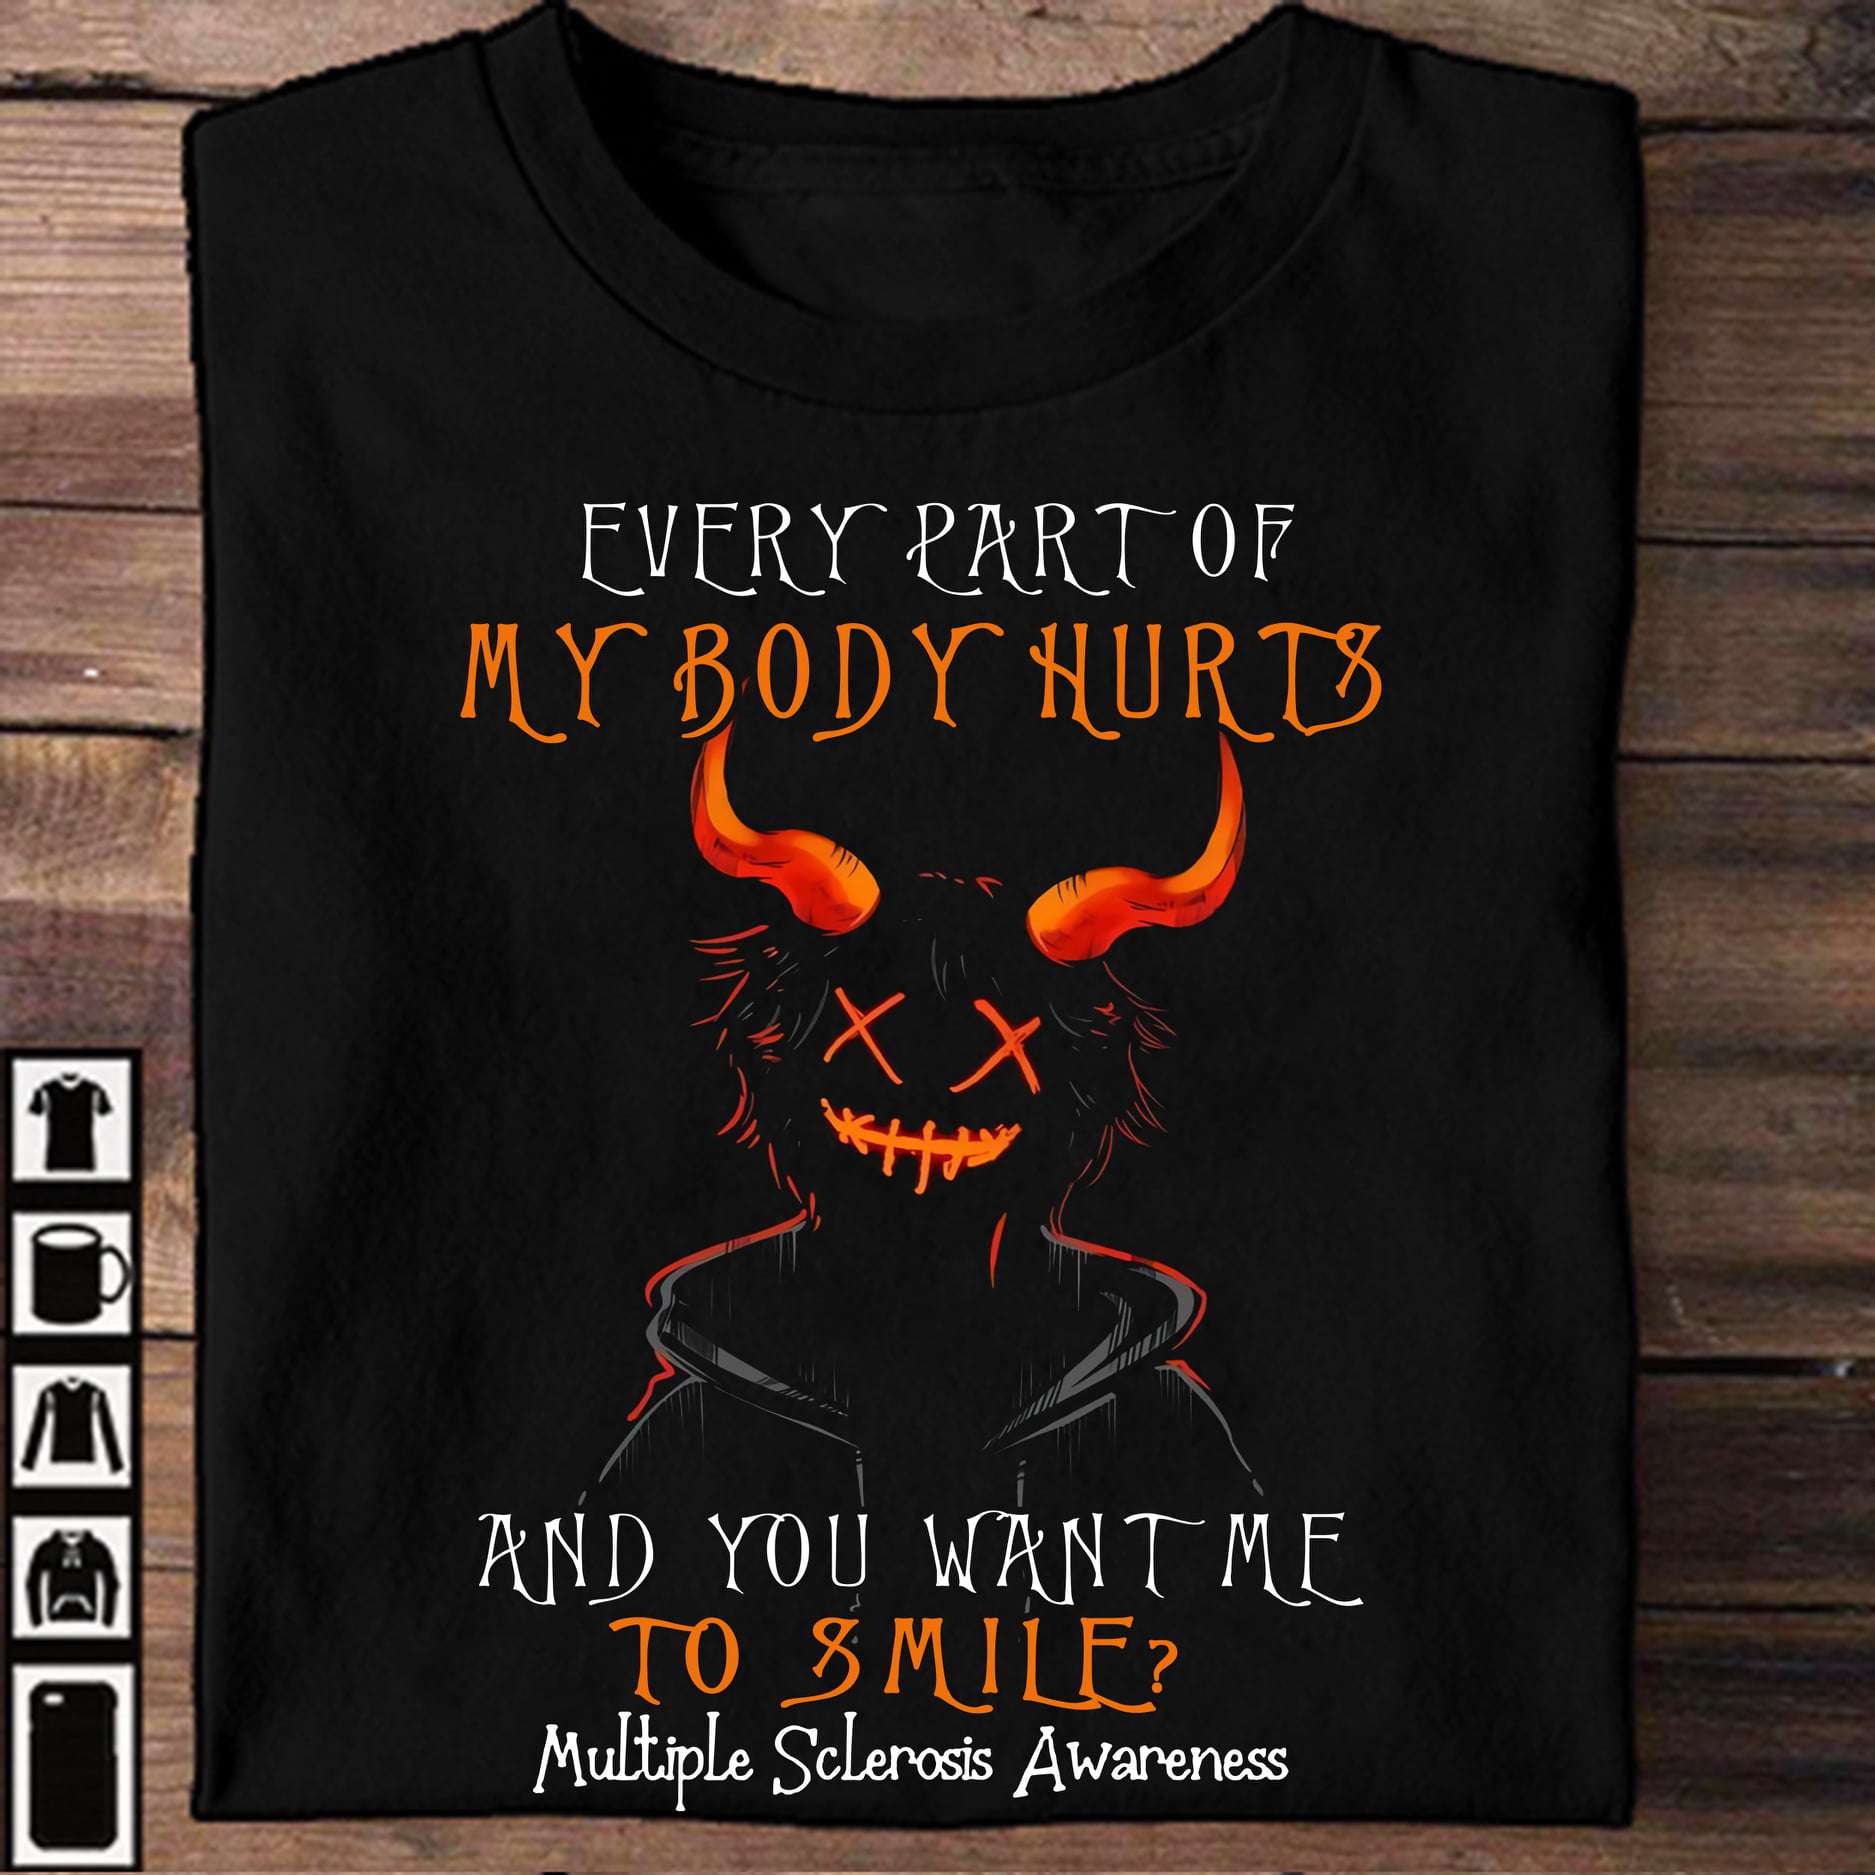 Every part of my body hurts and you want to smile - Multiple sclerosis awareness, devil sclerosis